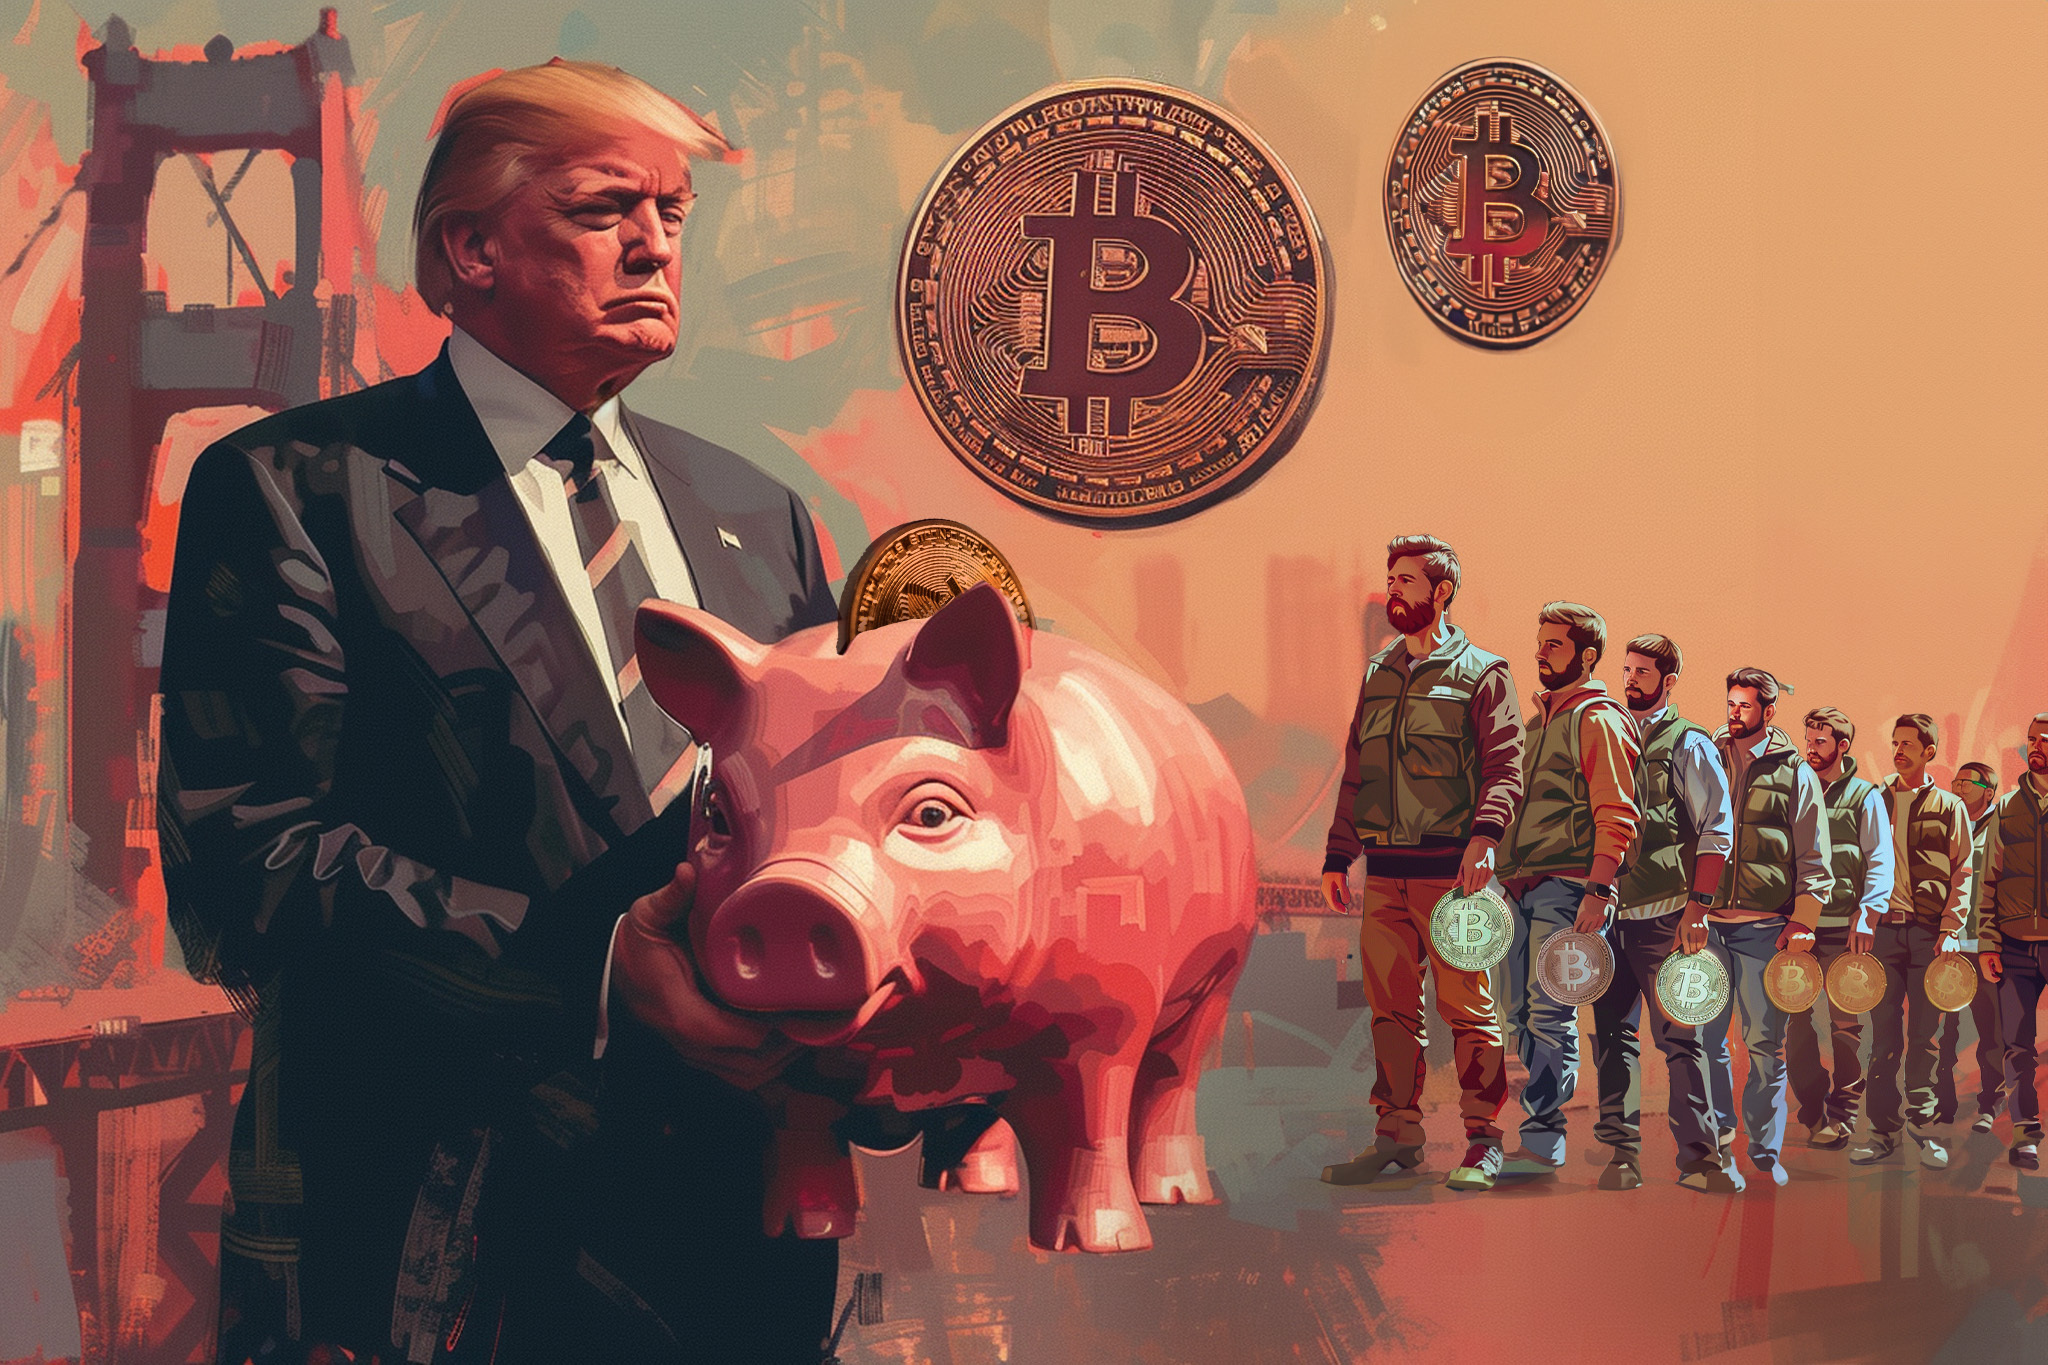 A man in a suit holds a large piggy bank. There are prominent Bitcoin symbols overhead and a line of men holding Bitcoins in the background against an urban setting.